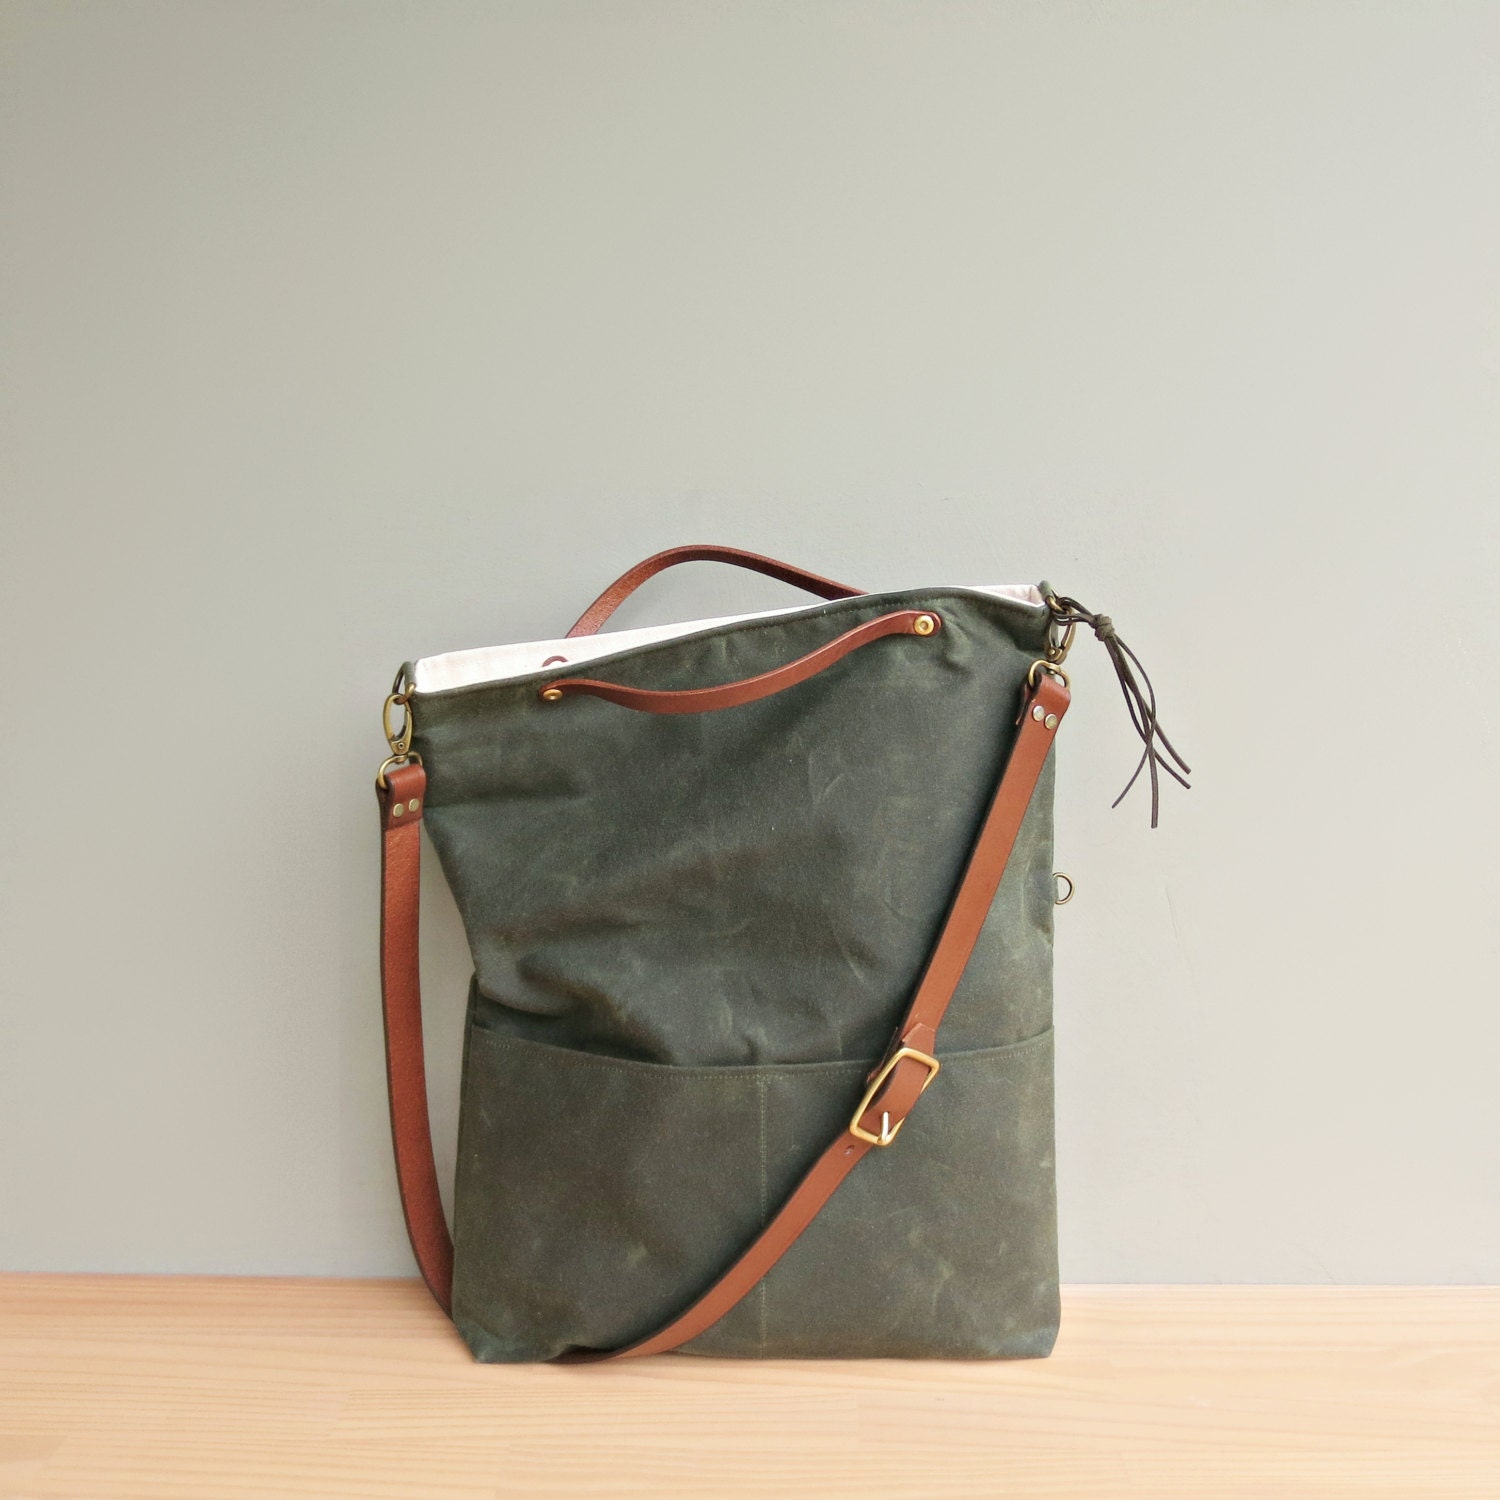 Convertible Waxed Canvas Tote with Leather Strap in Avocado